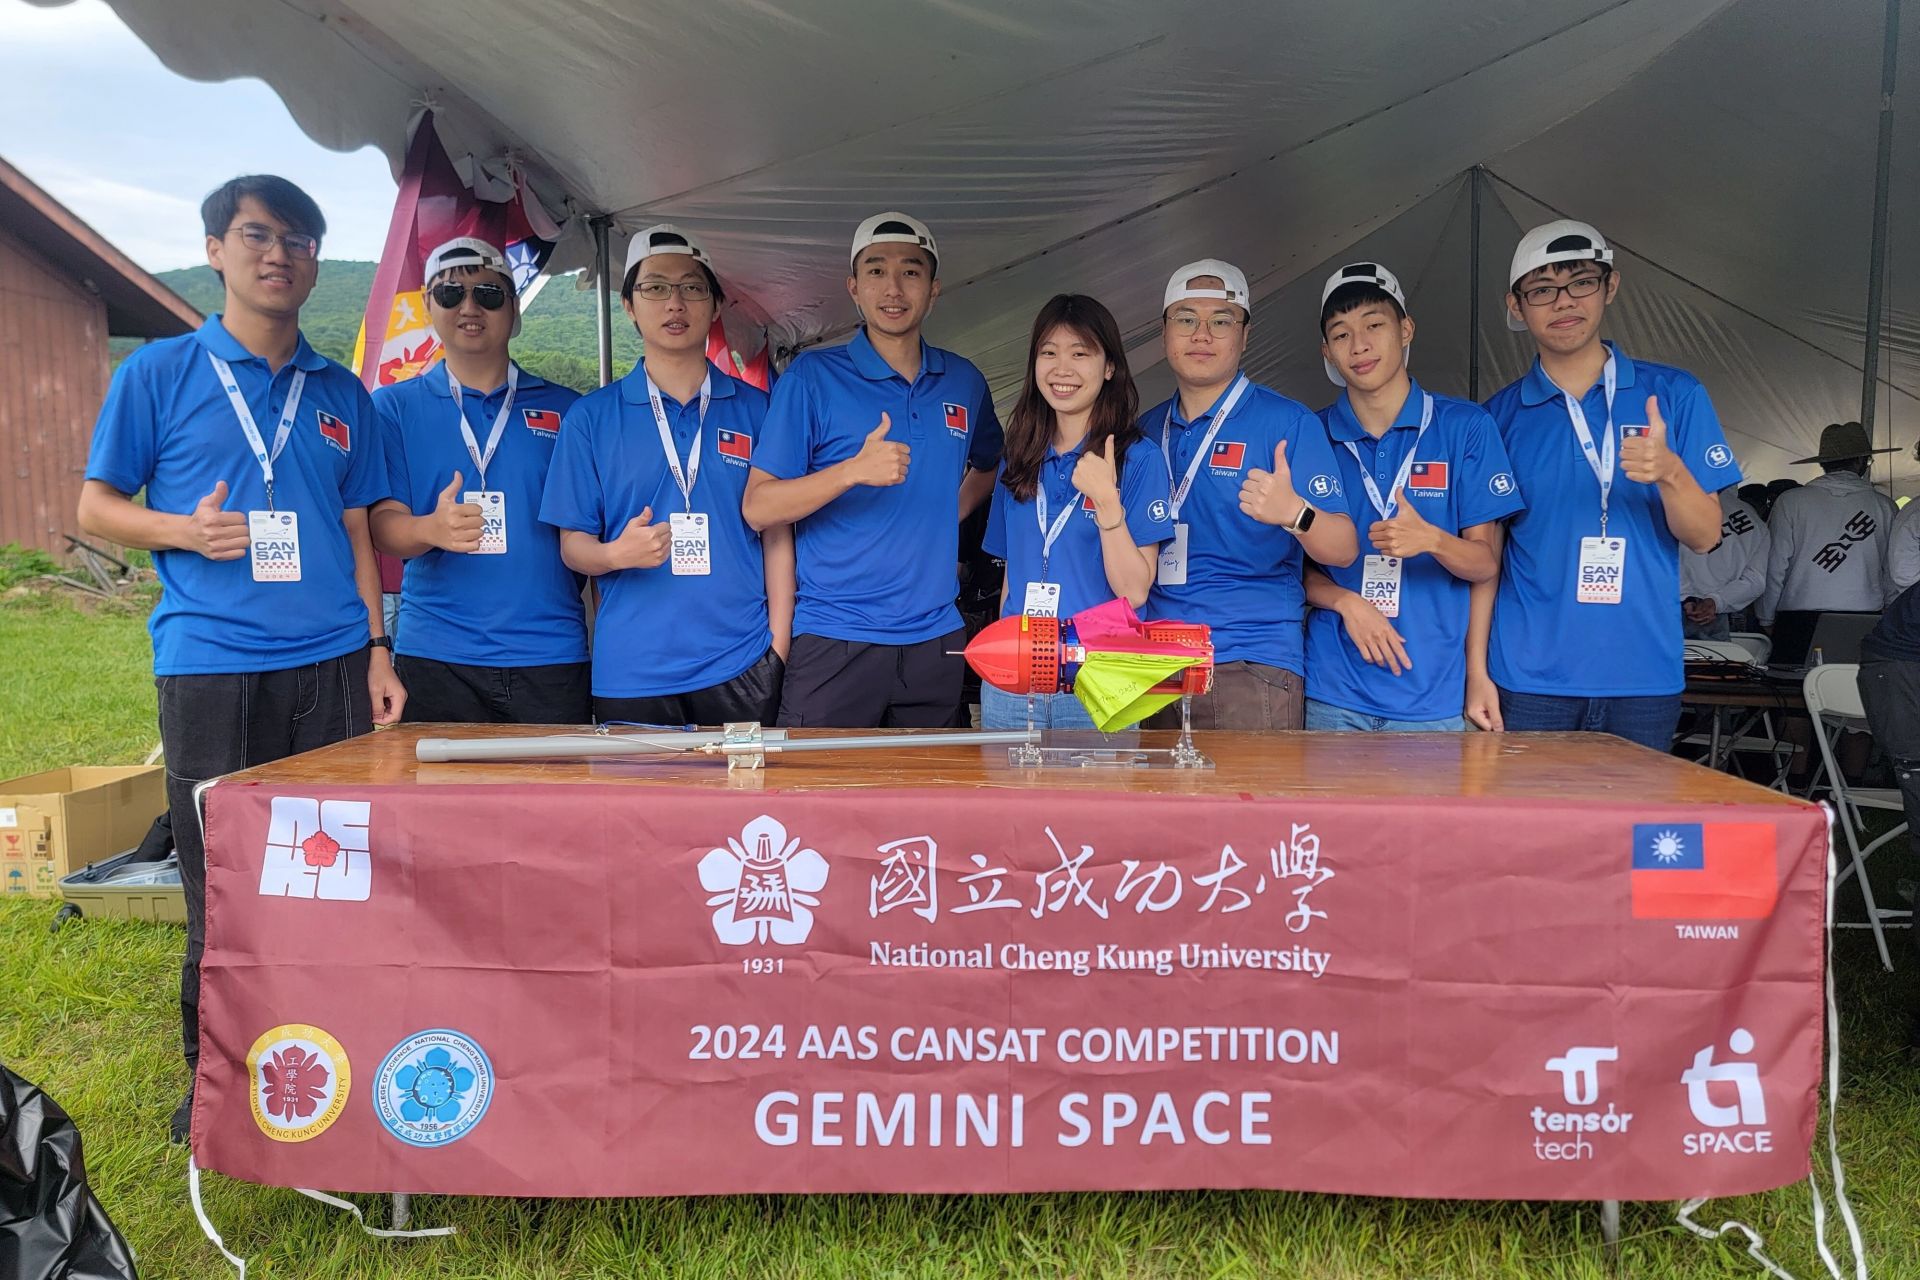 NCKU's Gemini Space team achieved 8th place globally and top in Asia in their debut at the International Cansat Competition.